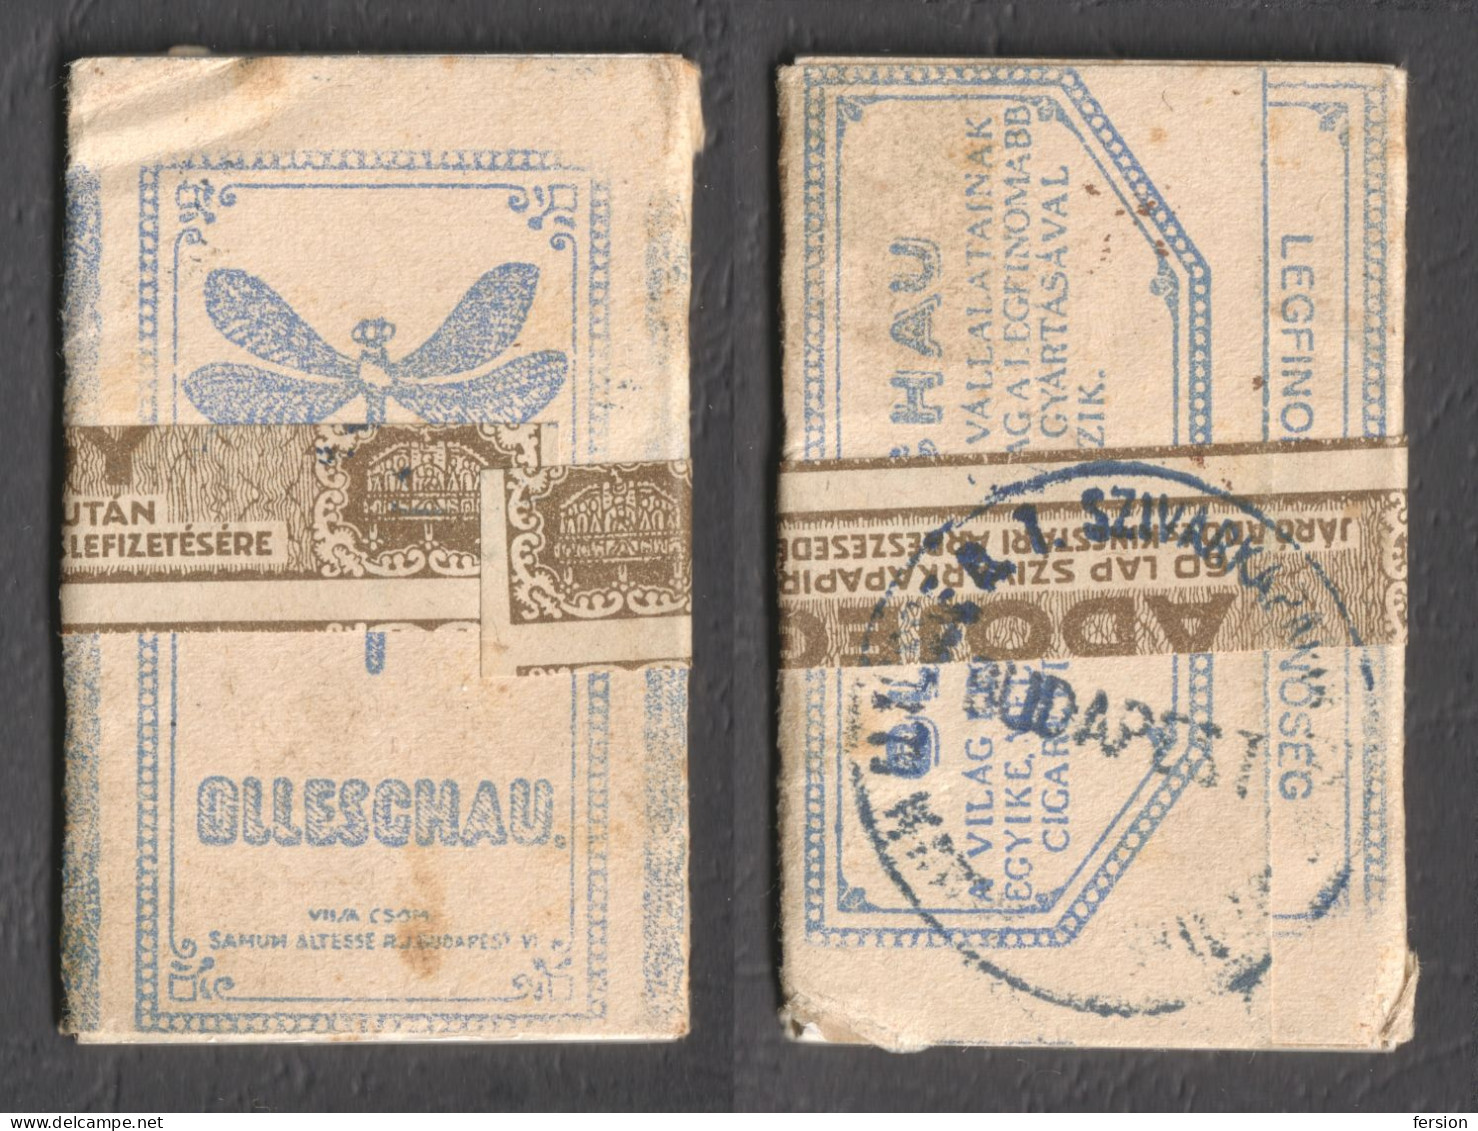 CIGARETTE TOBACCO Paper REVENUE Seal Fiscal Tax Stripe Hungary LABEL Cover Olleschau DRAGONFLY 1930 UNUSED Full Paper - Tabaco